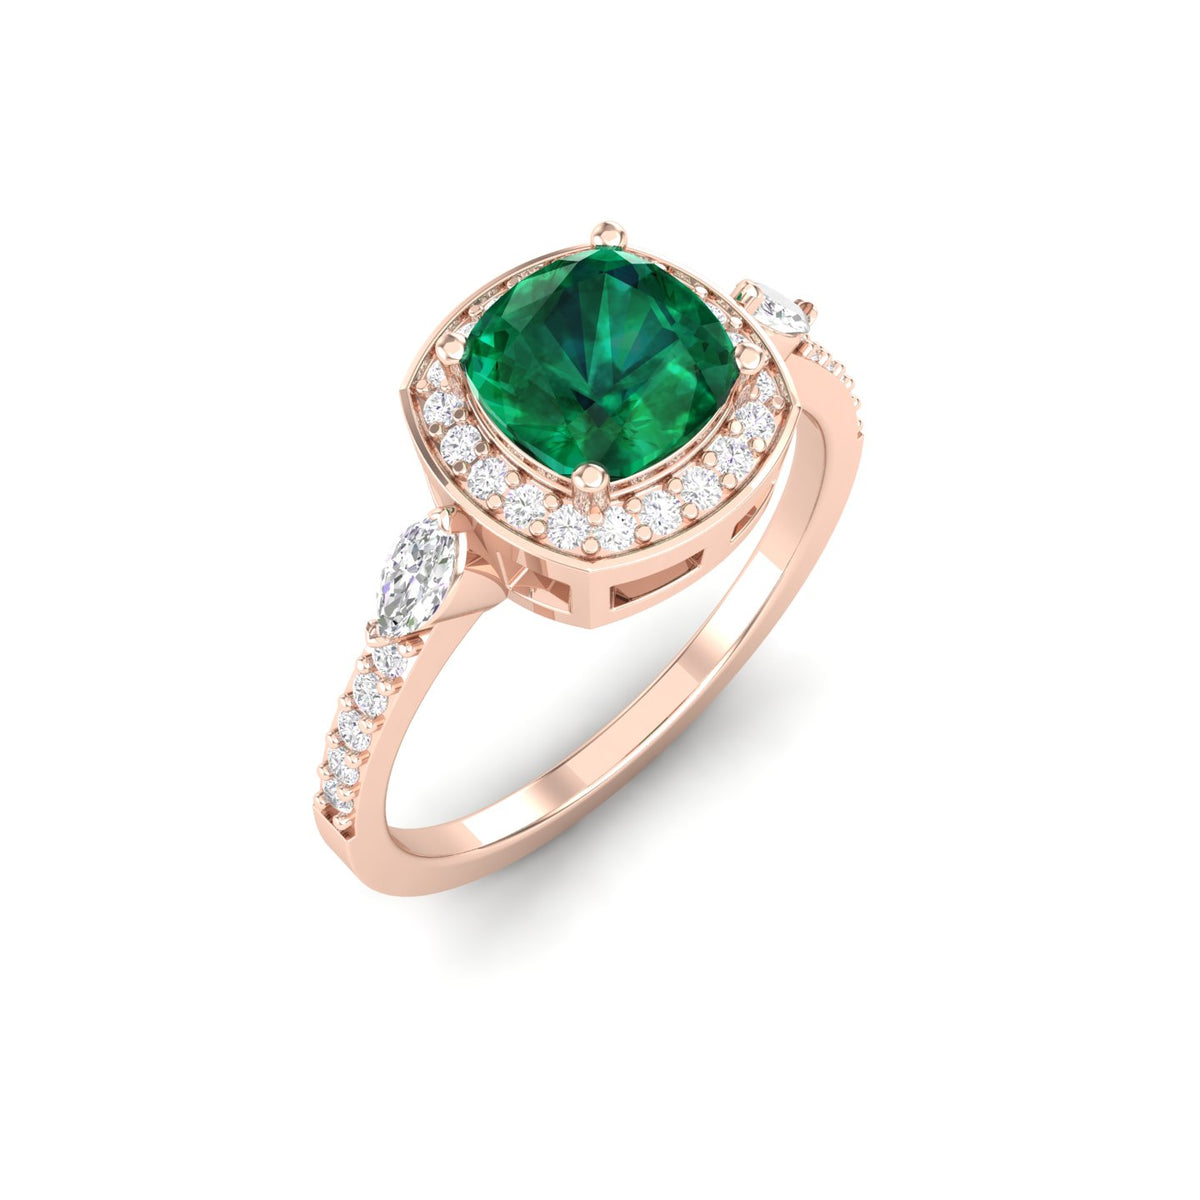 Maurya Victoria Solitaire Cushion Emerald Engagement Ring with Diamond Halo